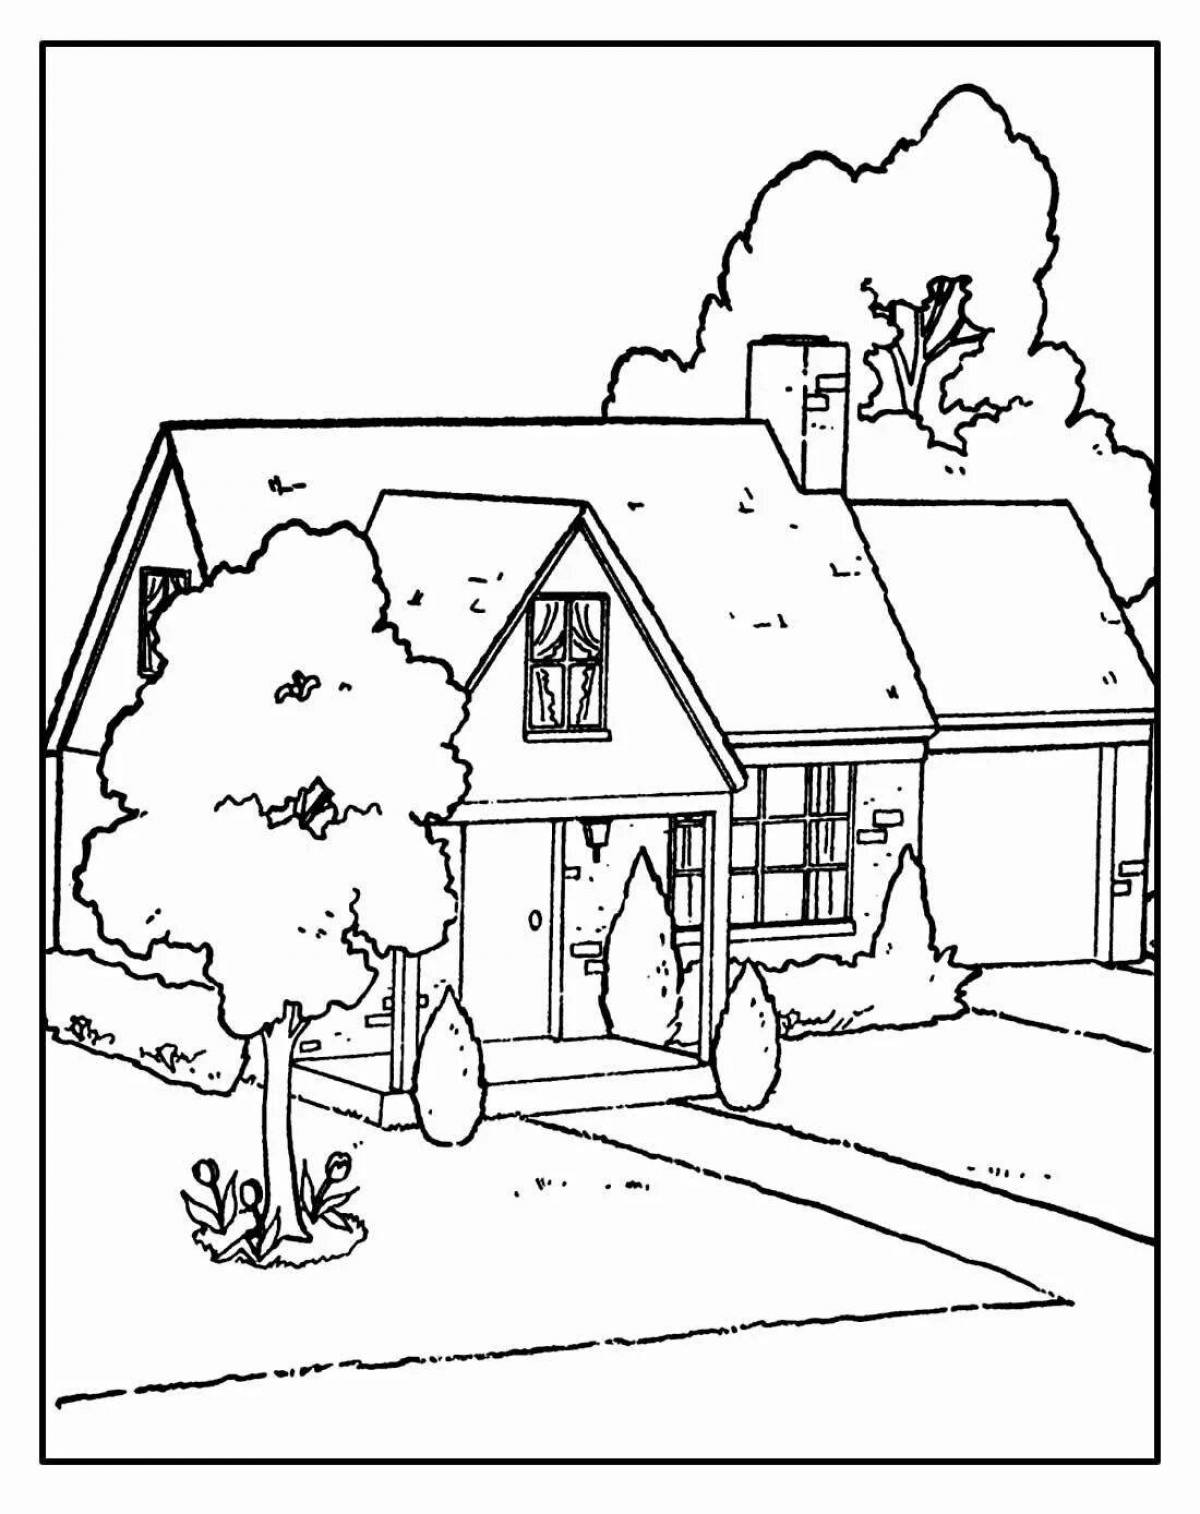 Coloring page glowing country house